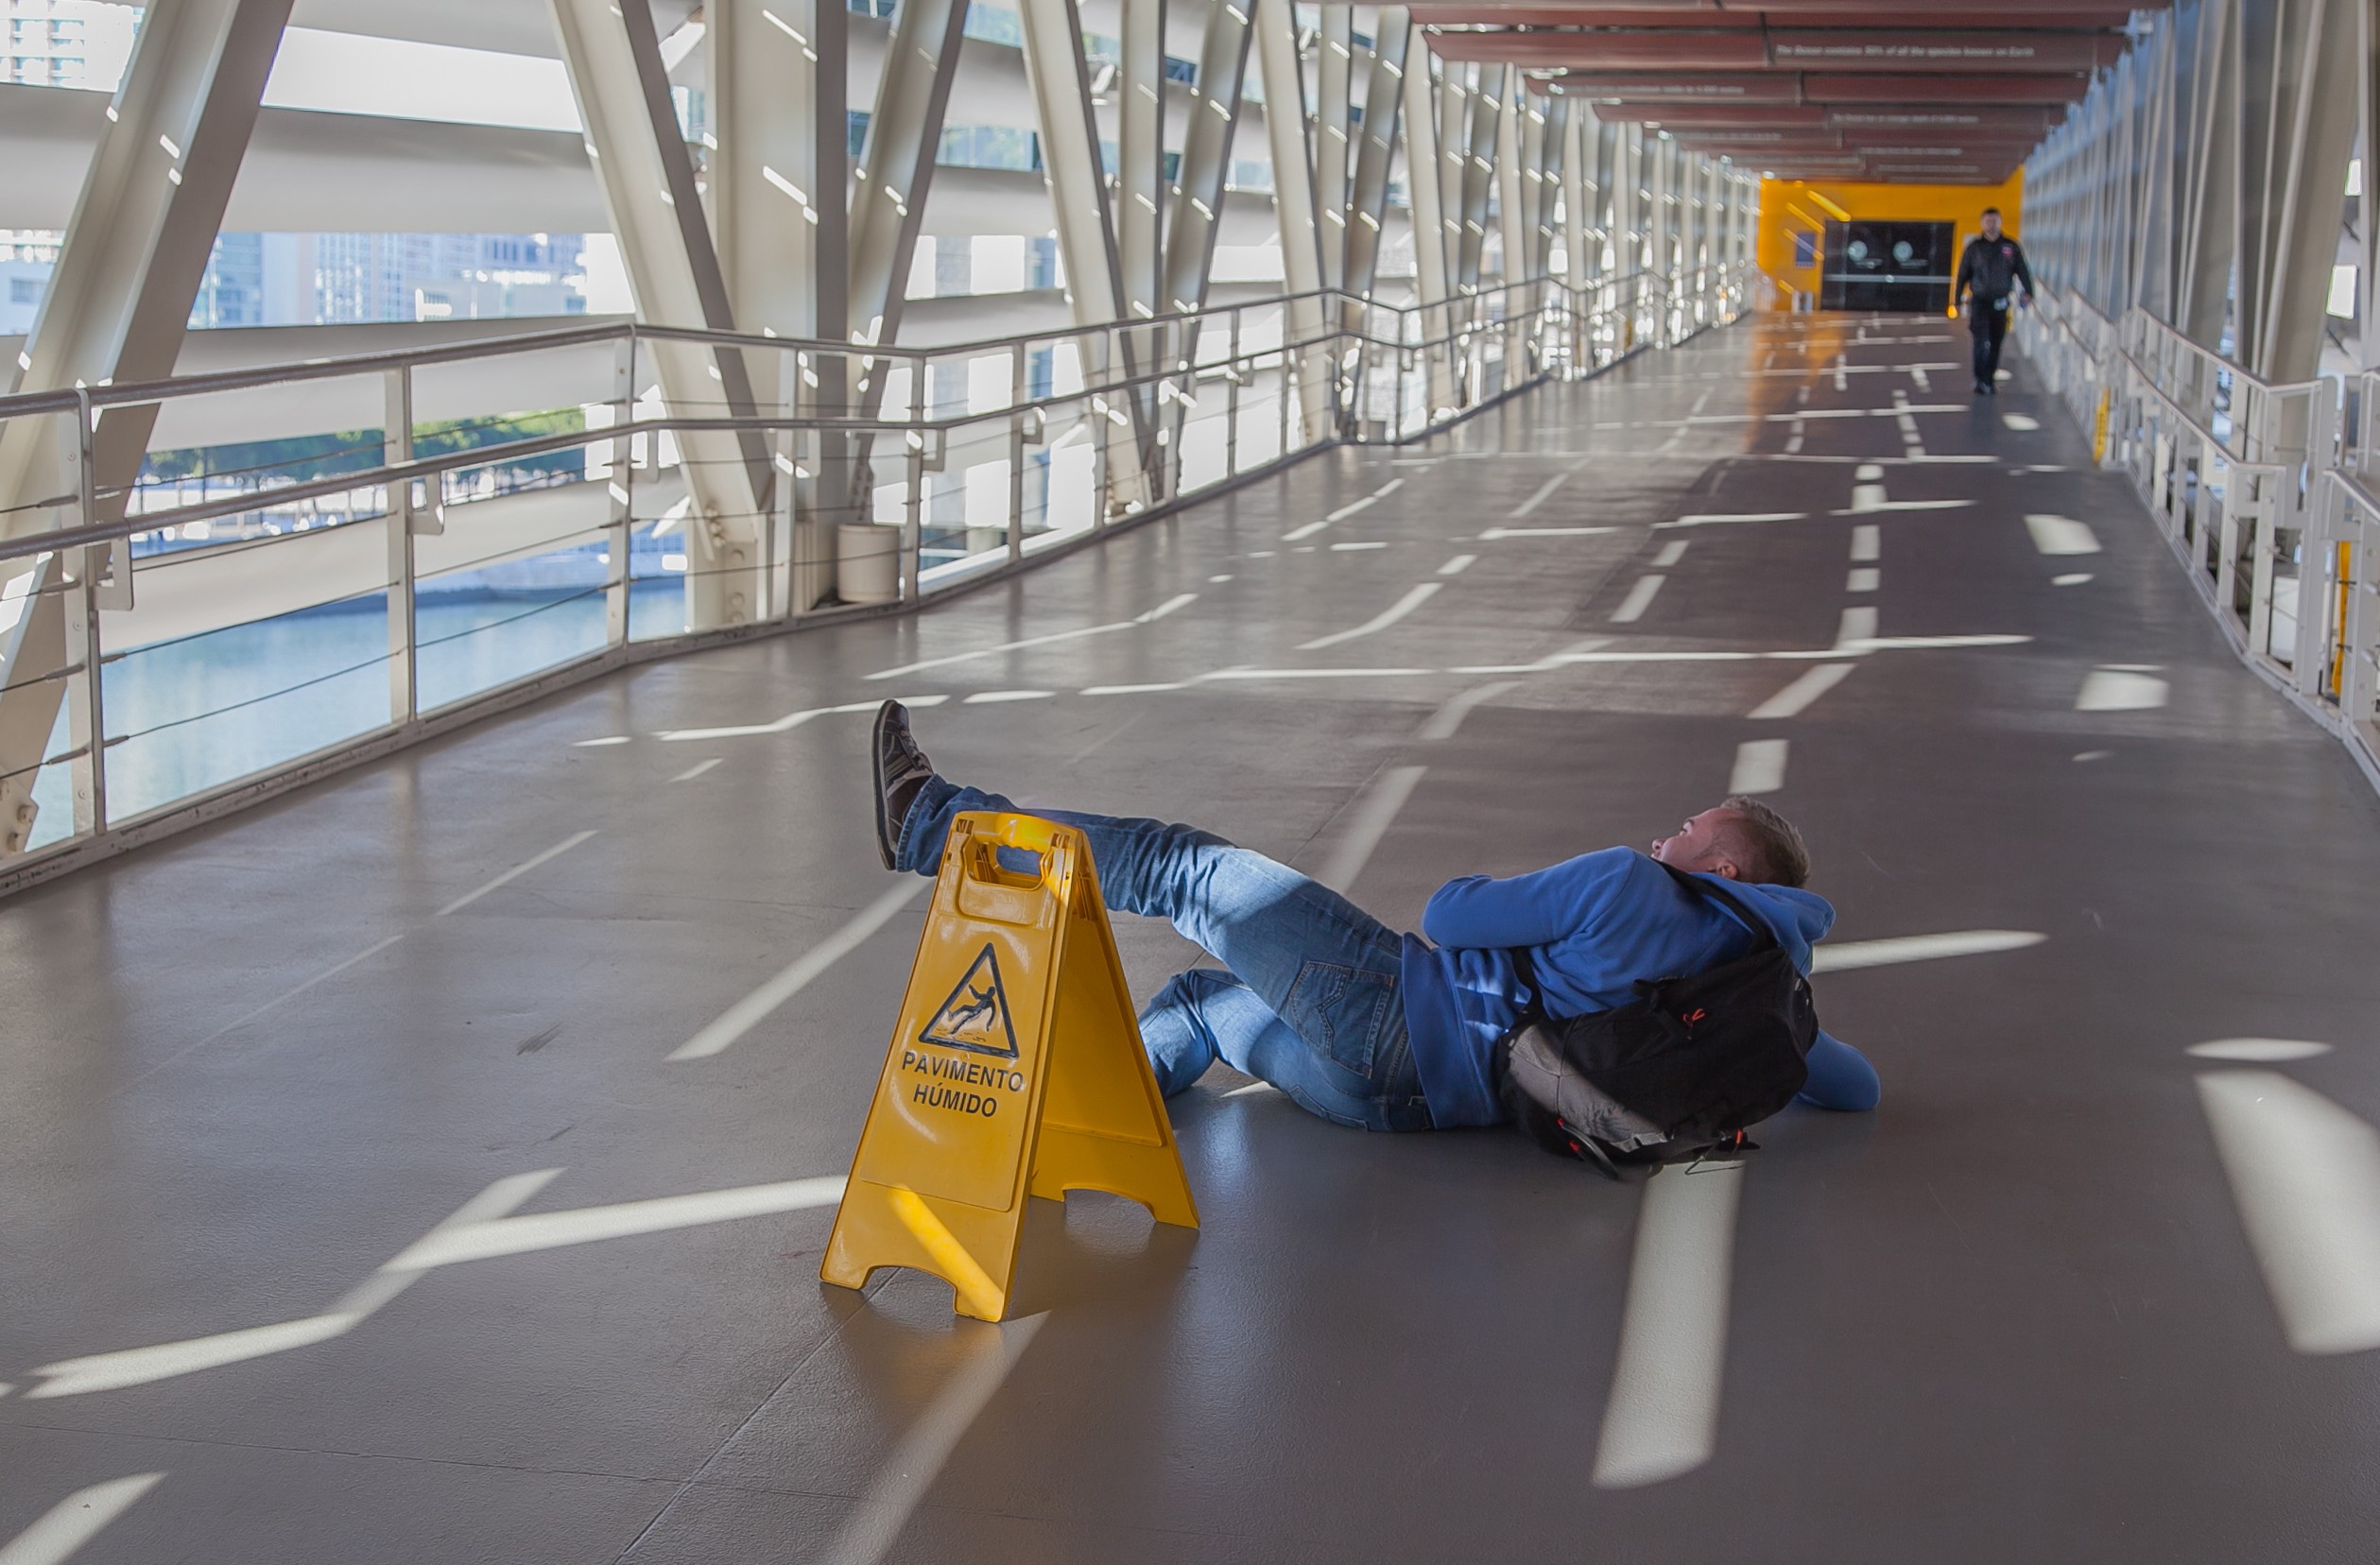 Injured? Call Fuentes Berrio Schutt 24/7 at (954) 752-1110 to speak with our experienced Deerfield Beach experienced Slip and Fall Injury Lawyers in Deerfield Beach, Florida who fight for your full compensation.